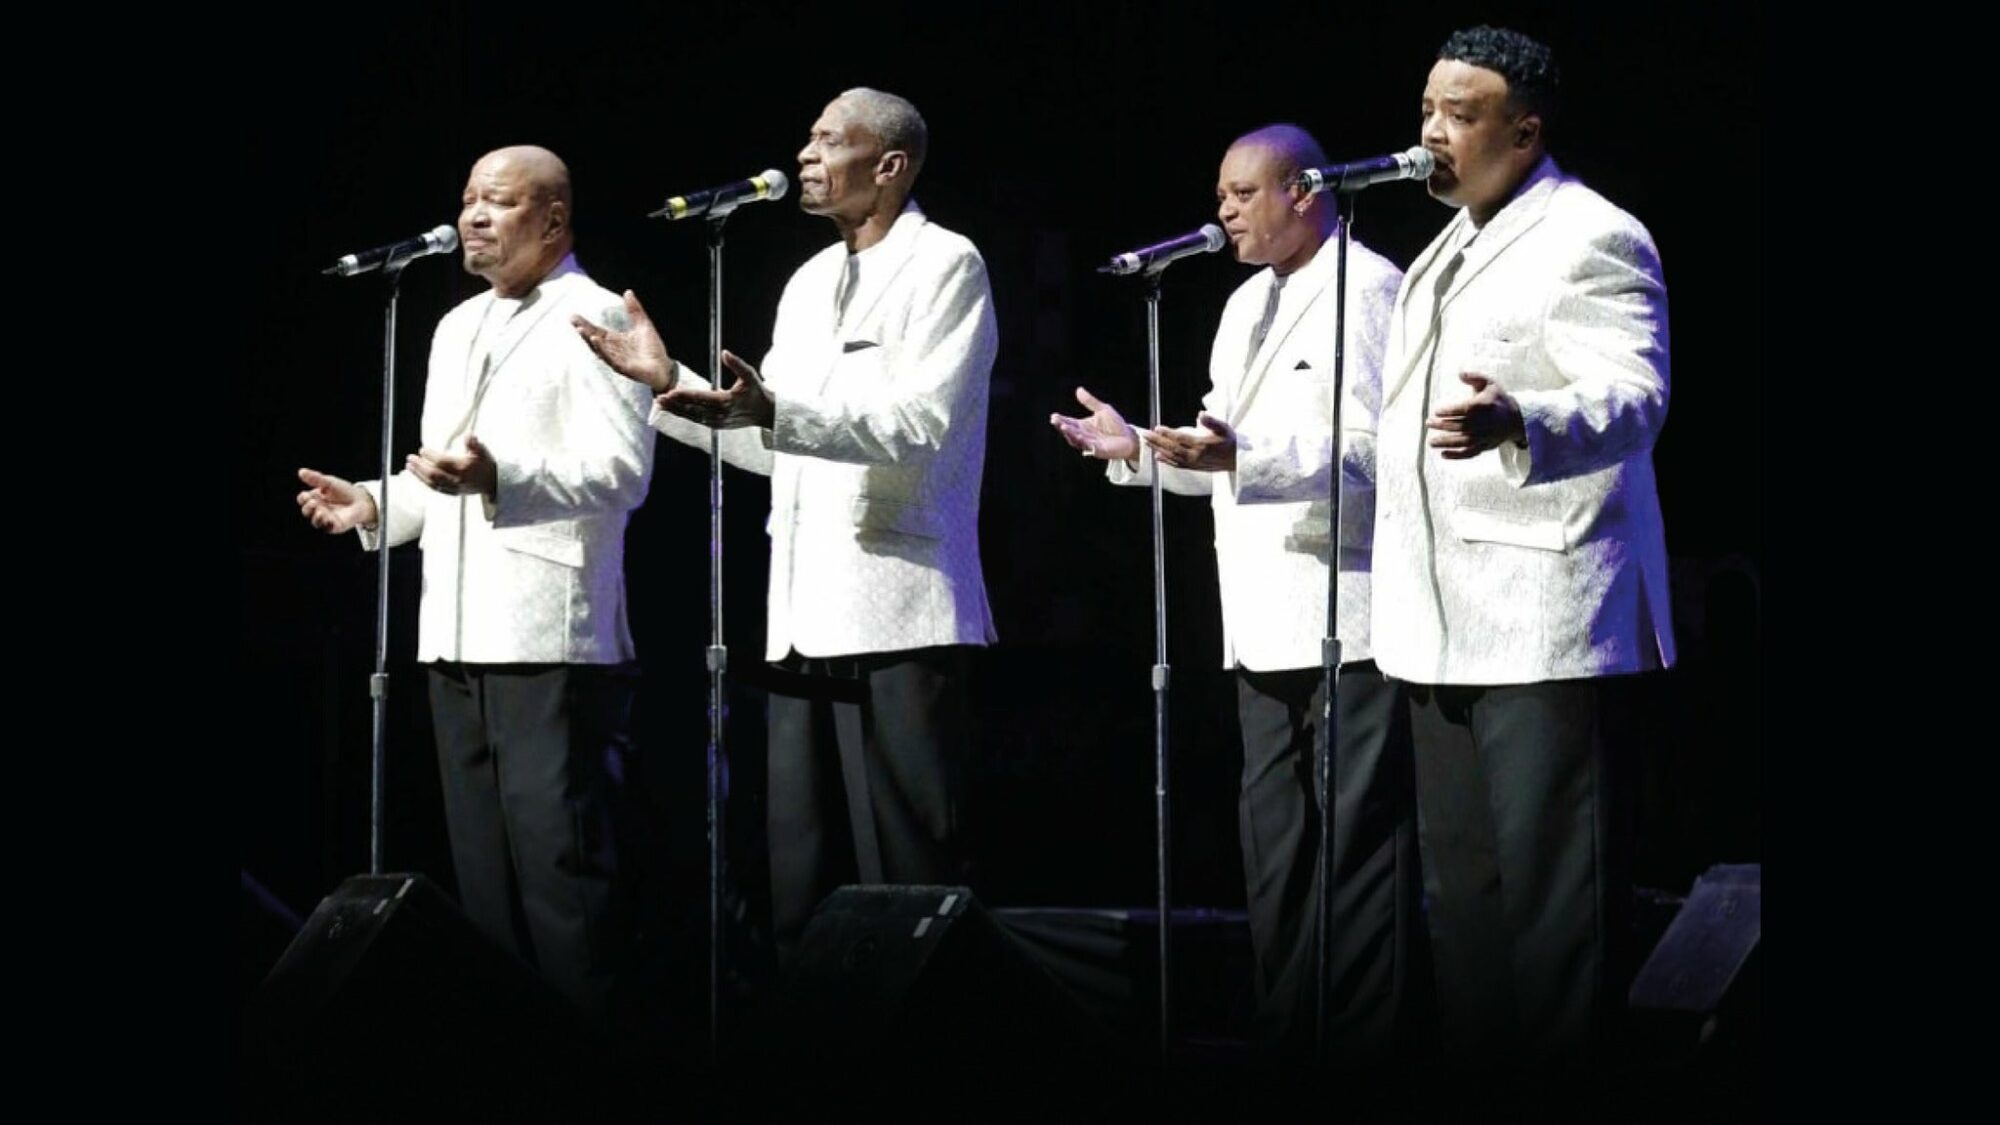 Image name The Stylistics at Sheffield City Hall Oval Hall Sheffield the 9 image from the post Events in Yorkshire.com.